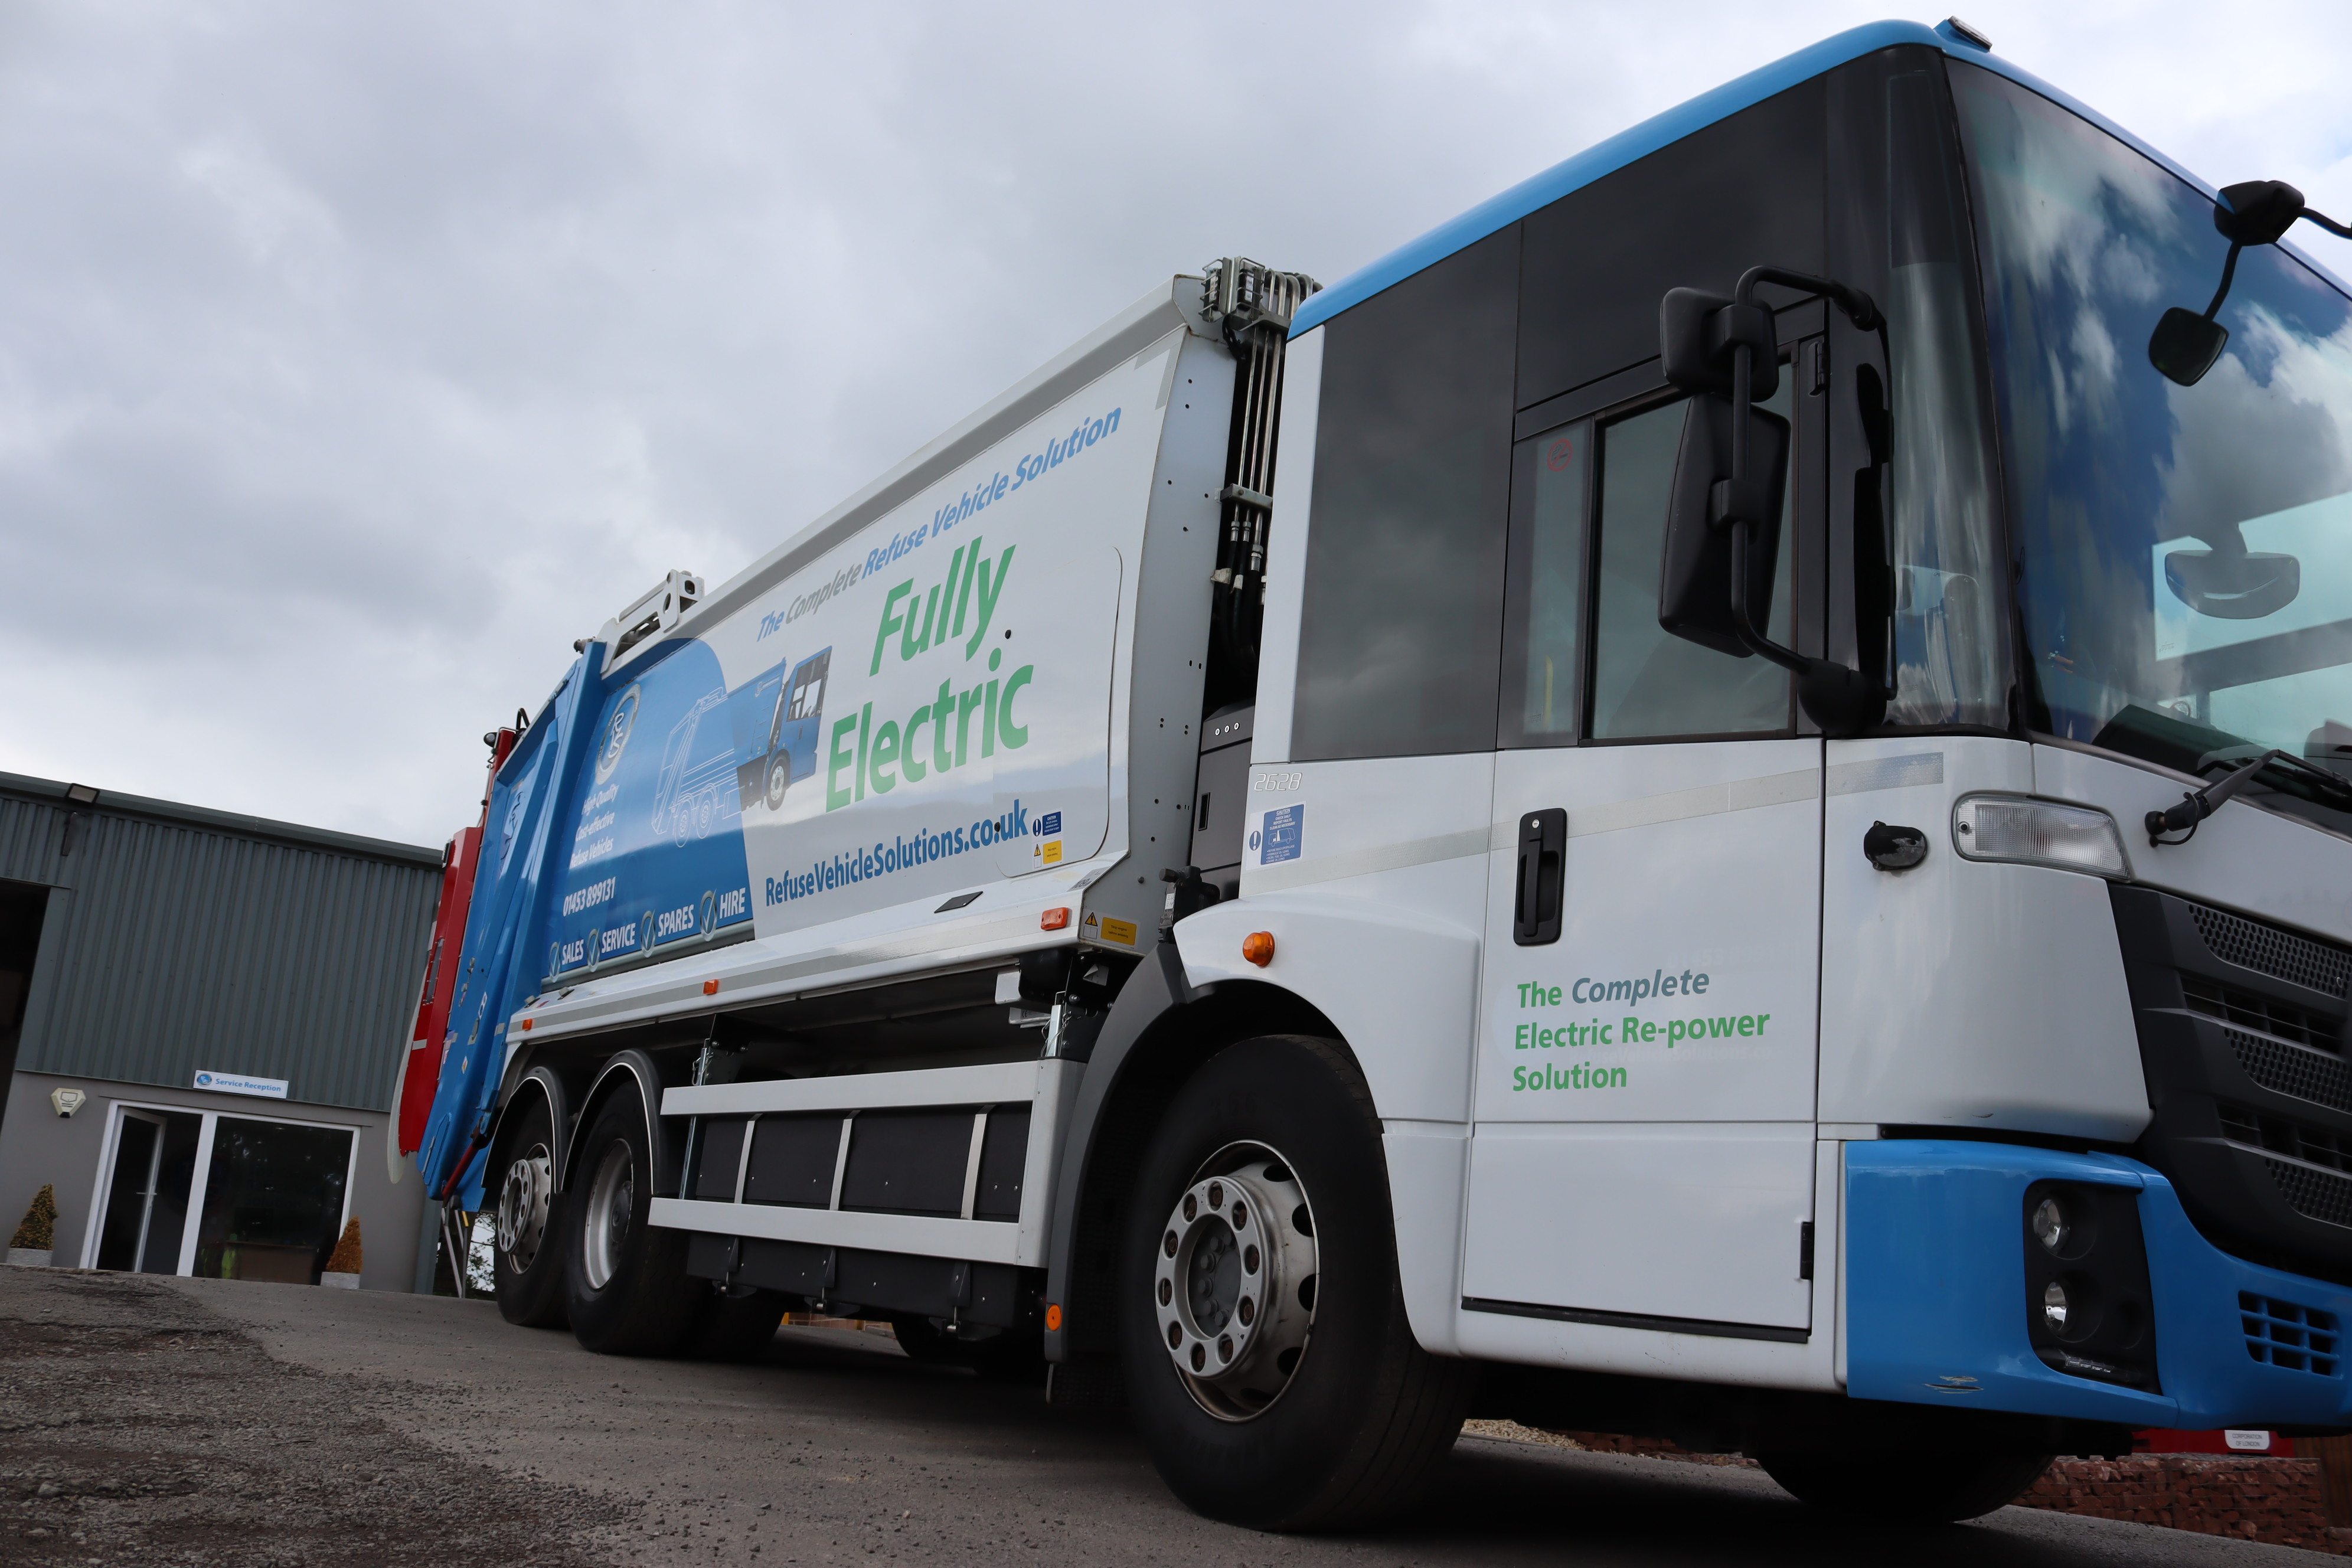 London-based company impressed by the e-One RCV performance